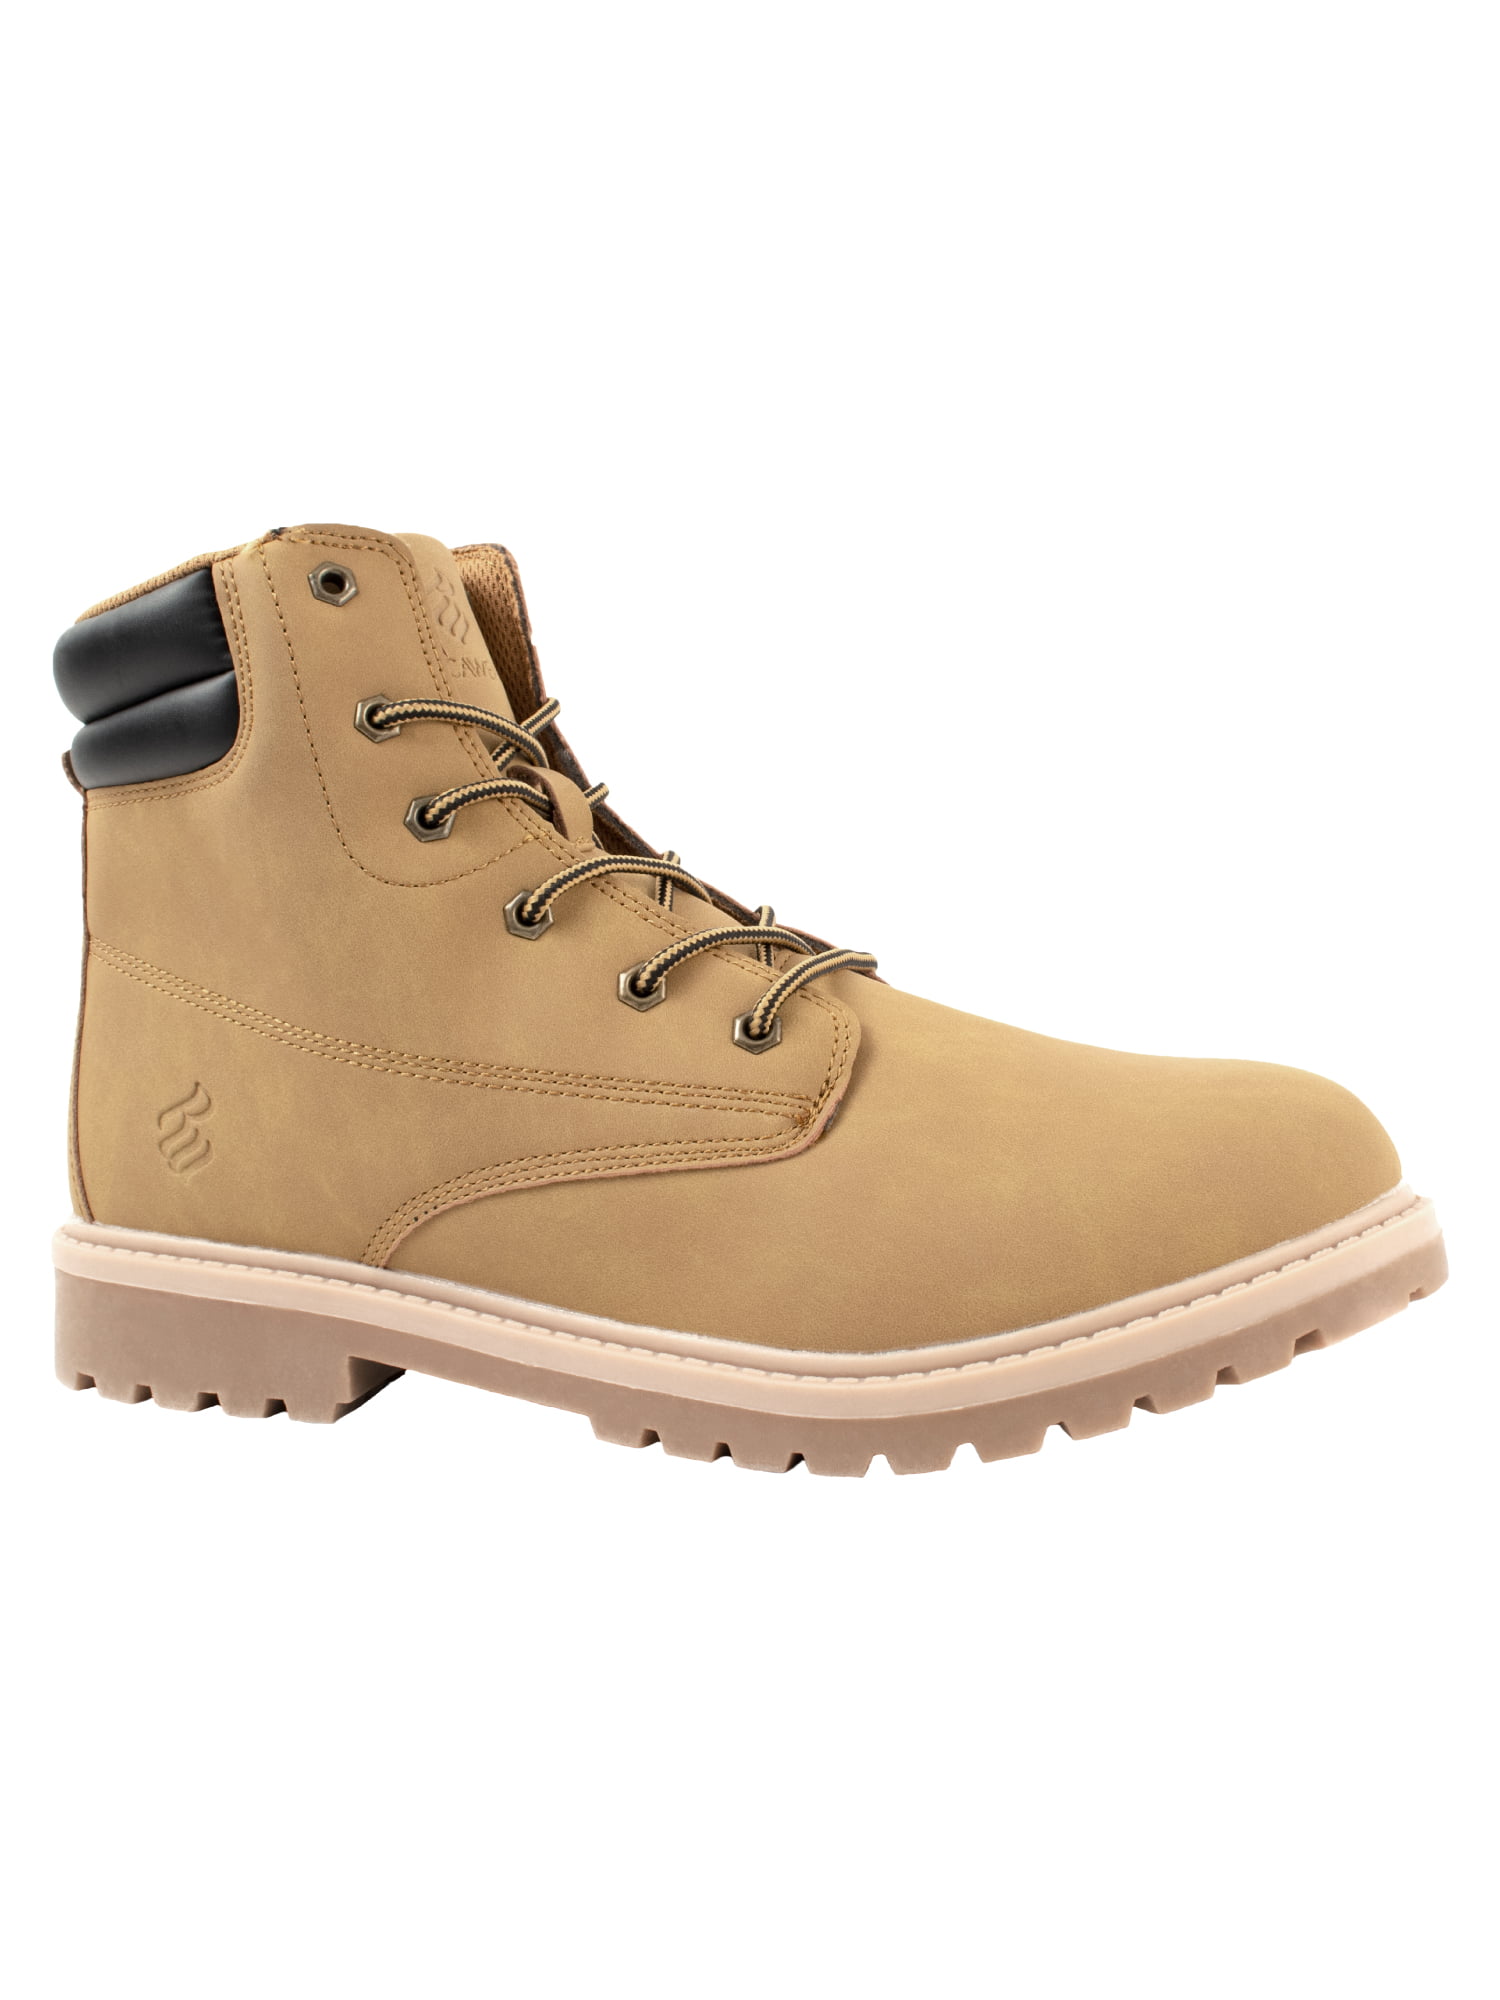 Rocawear - Rocawear Lincoln Men's Boots 